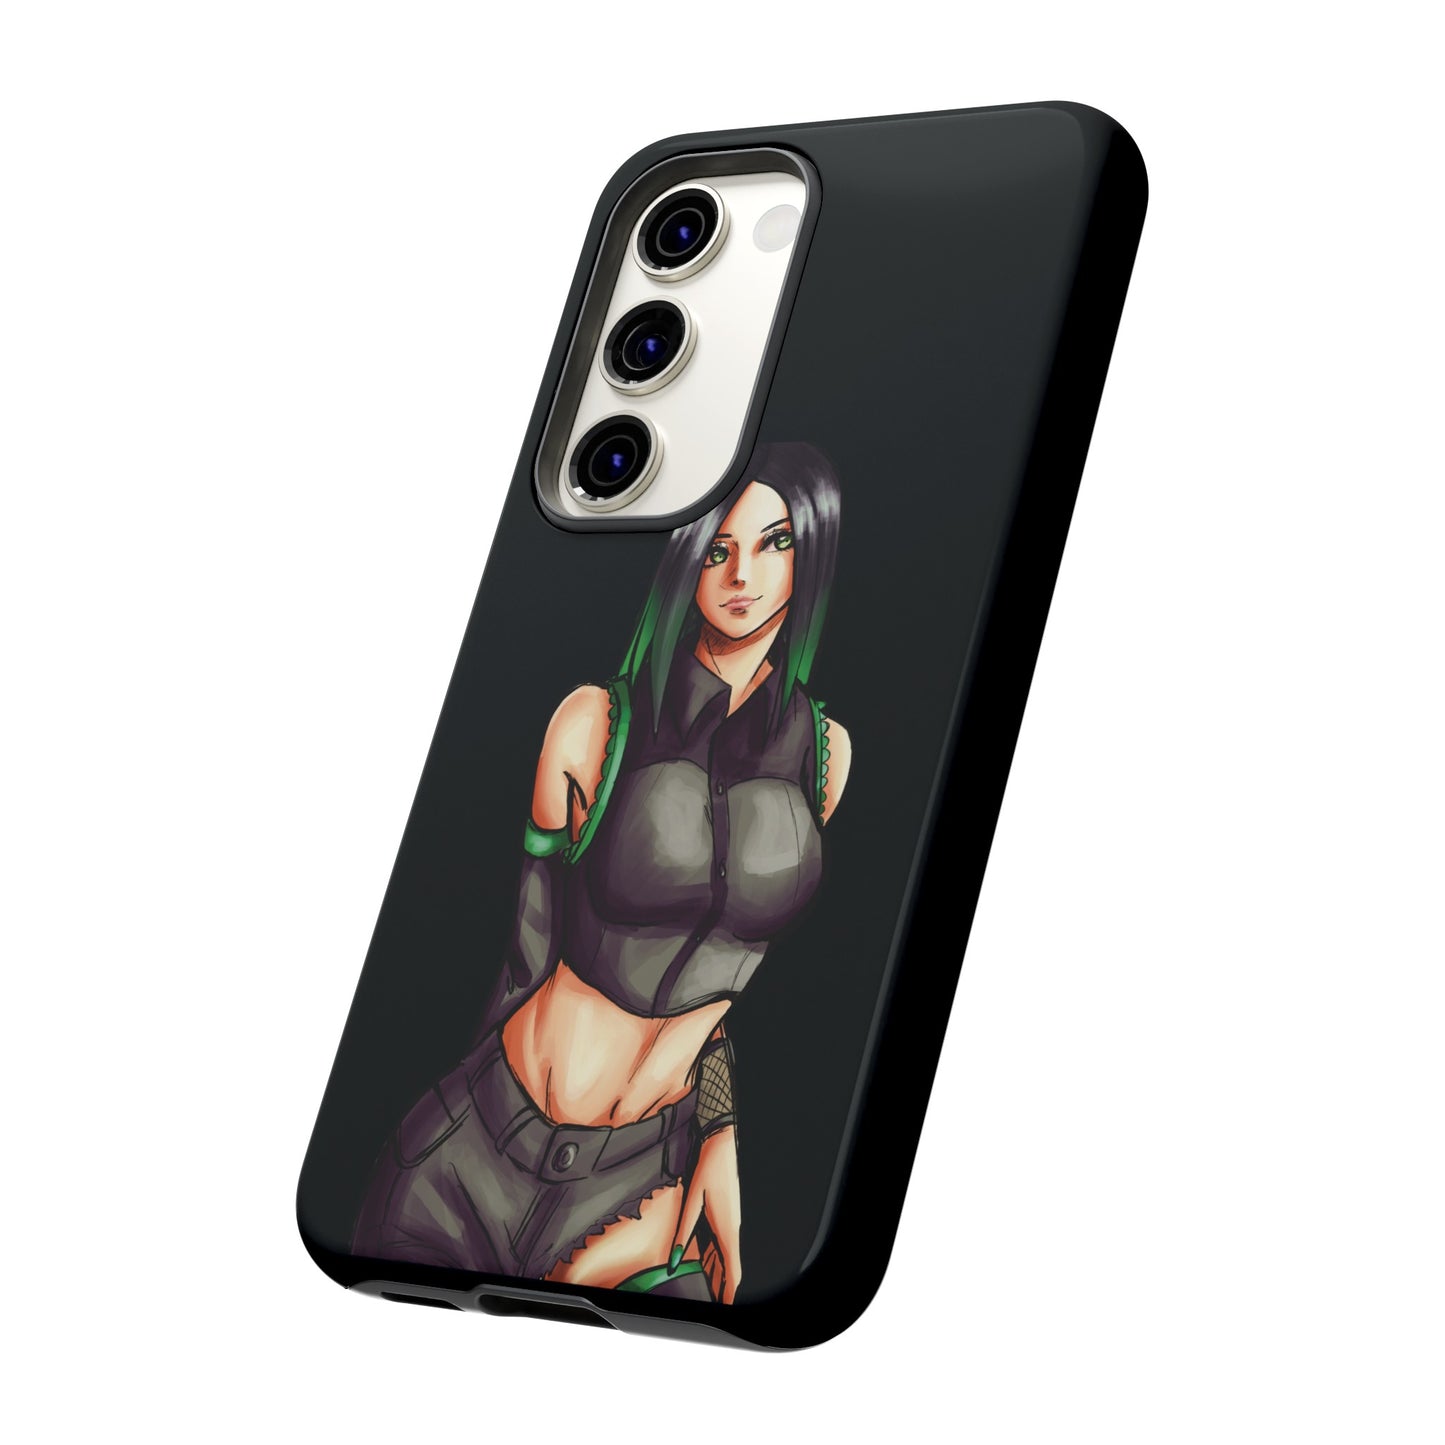 STXRPXTCH ONE-SHOTS- Volume 2 Phone Cases for iPhones and Samsung